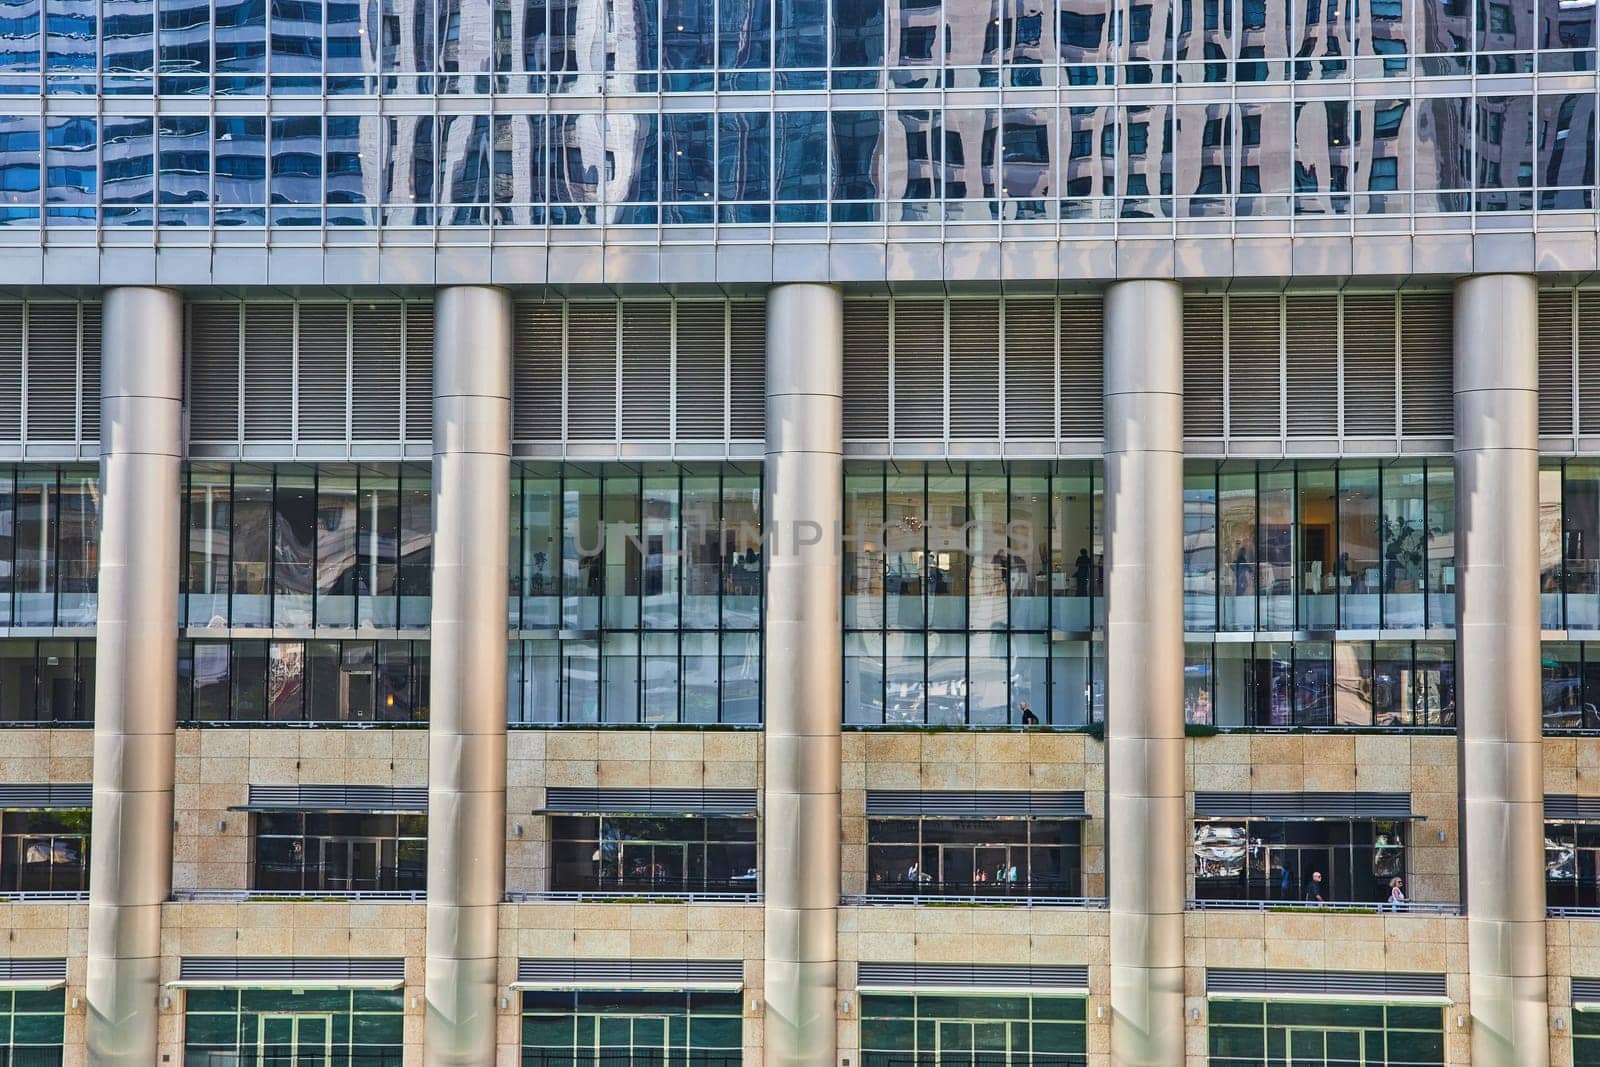 Image of Chrome pillars with reflective windows and bars between in architecture view of Chicago, IL building